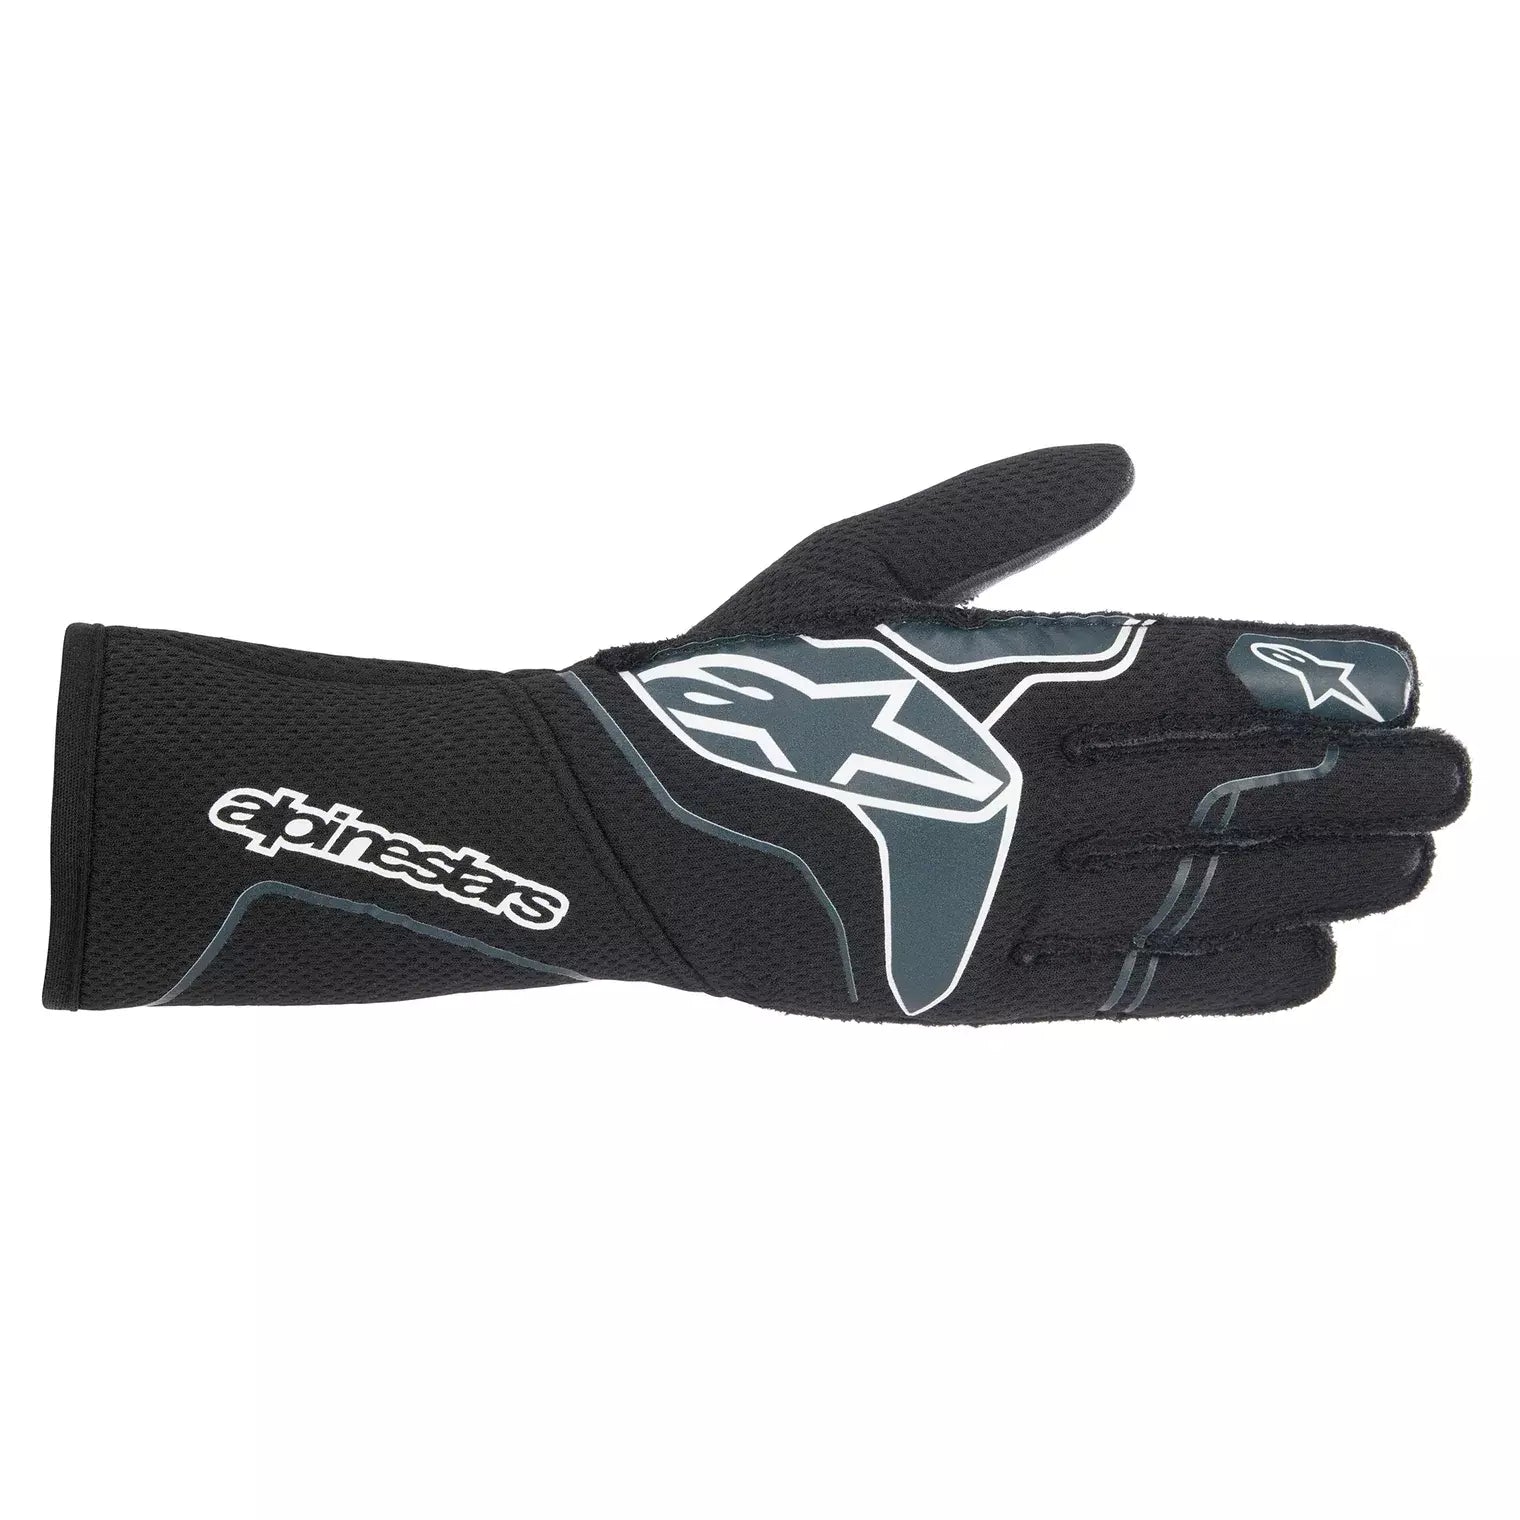 Alpinestars Gloves Tech 1-ZX Black / Grey 2X-Large Safety Clothing Driving Gloves main image